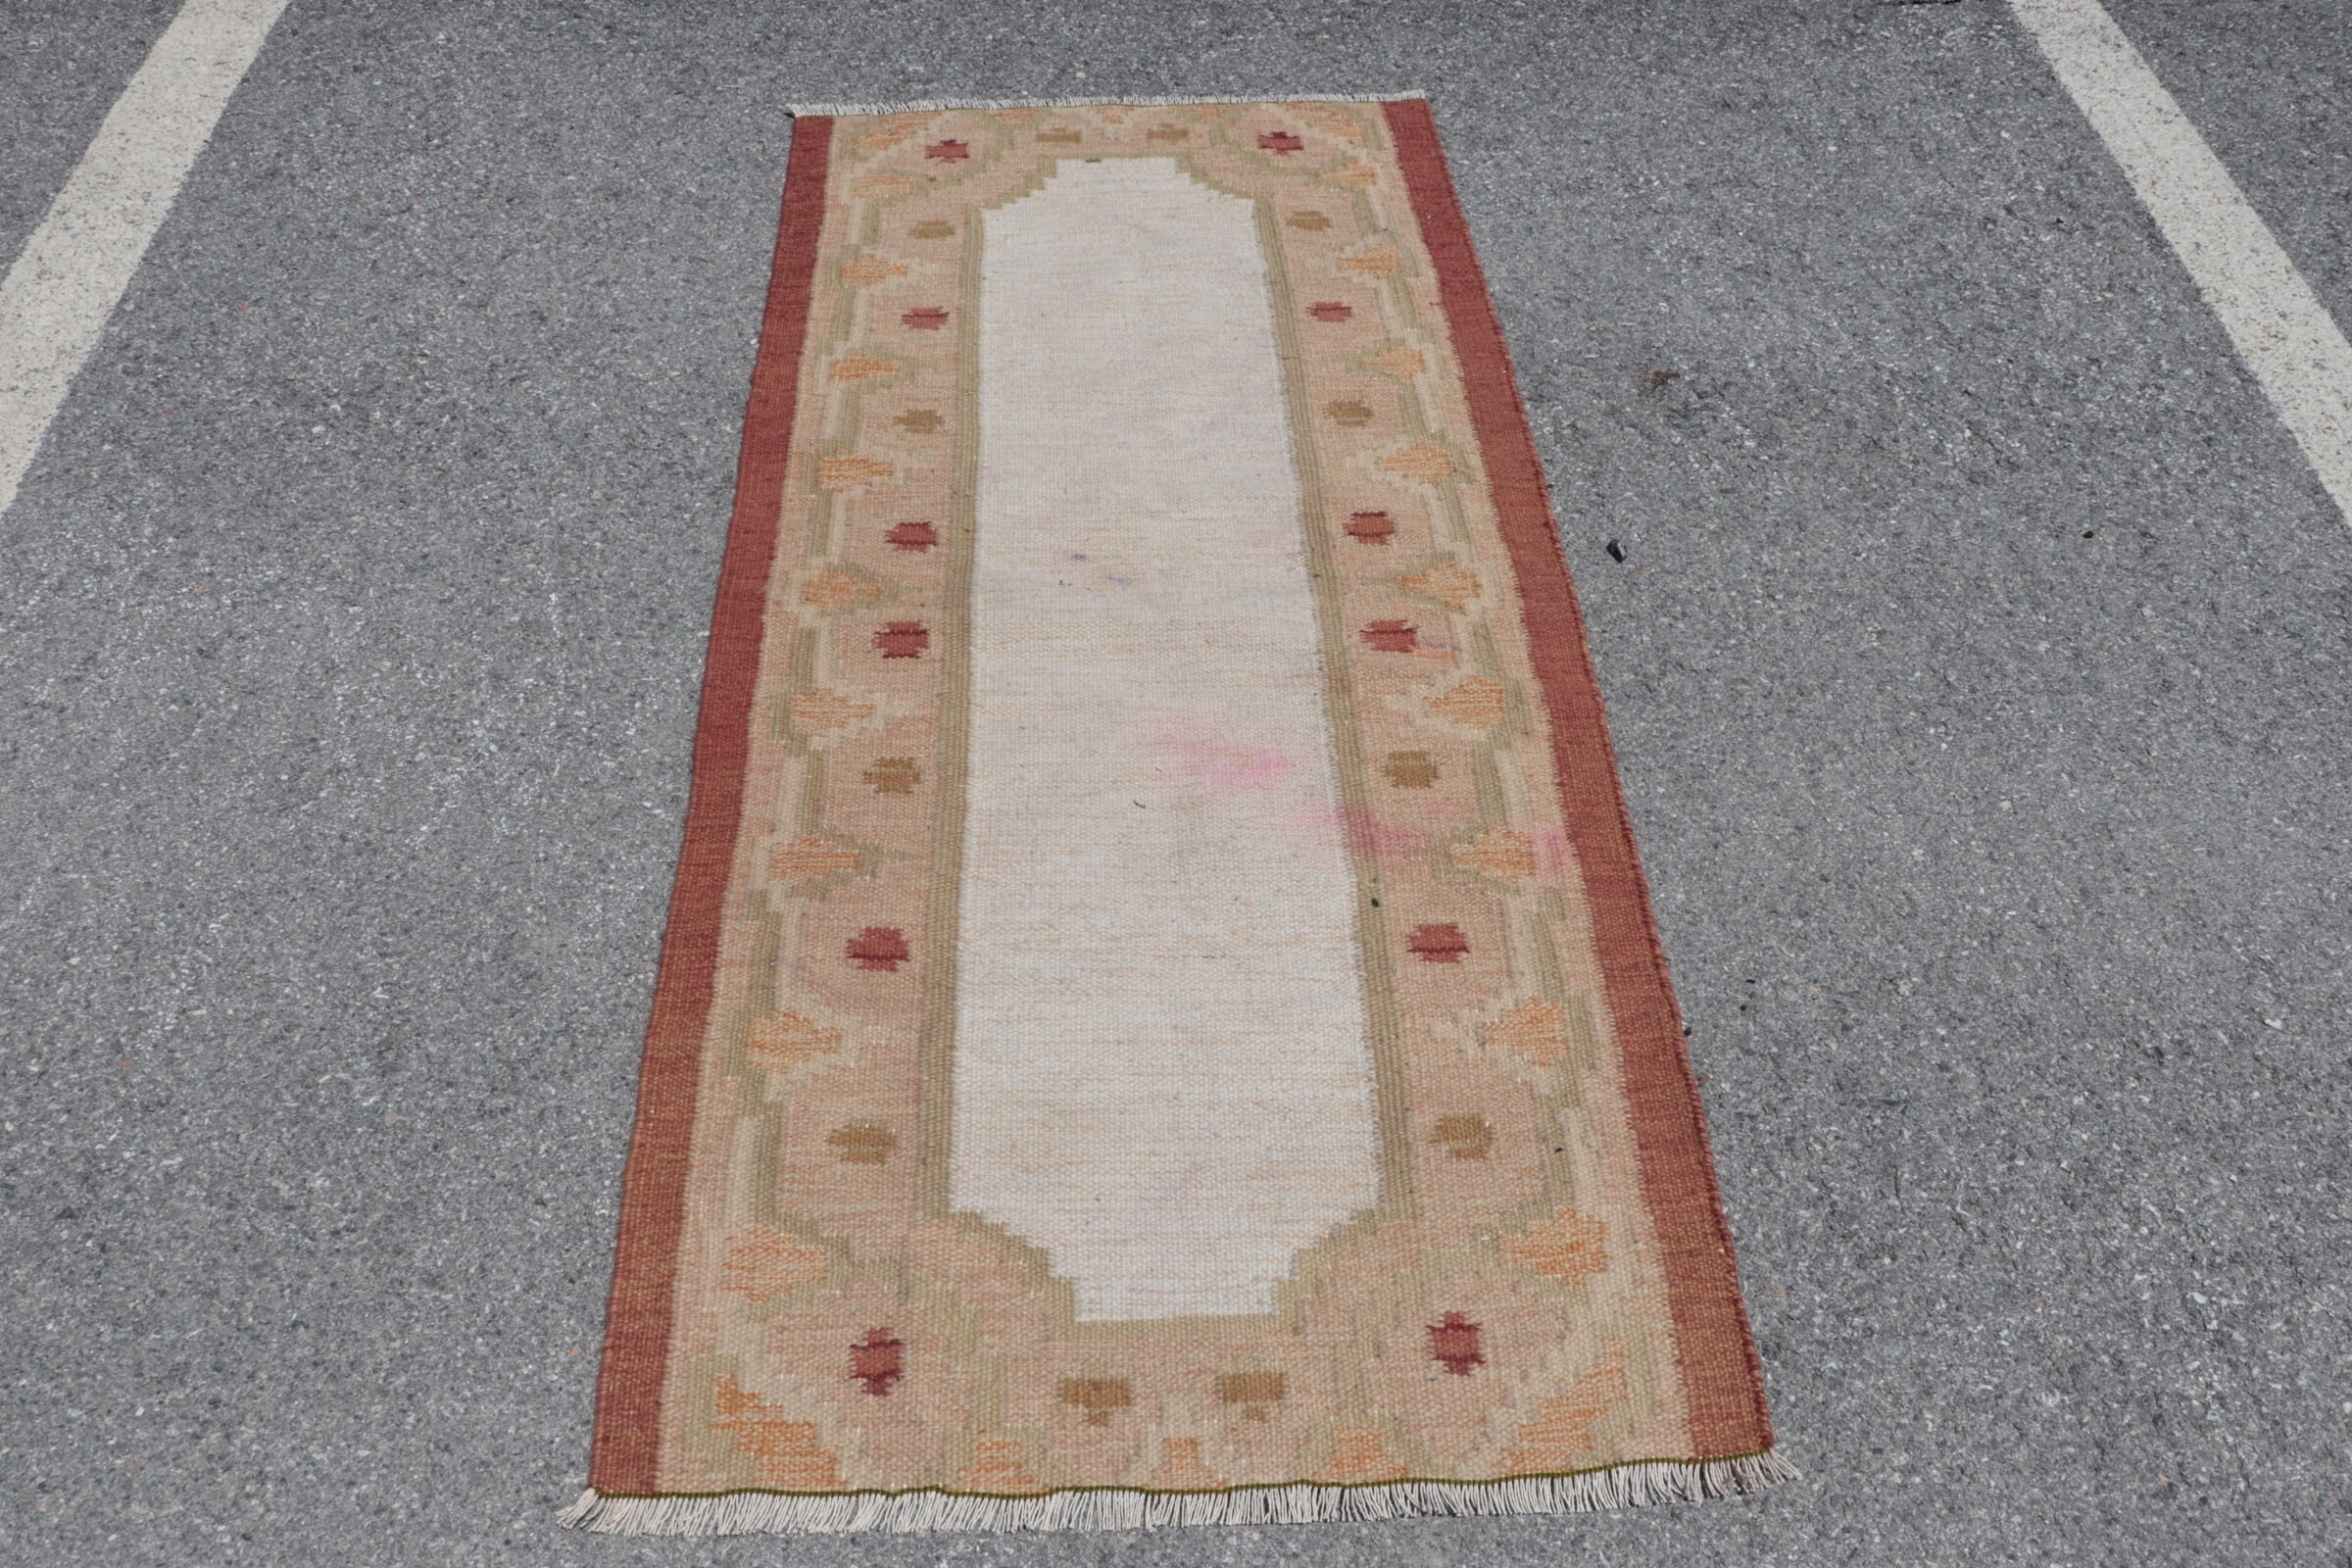 Rugs for Kitchen, Nursery Rug, Pale Rug, Turkish Rugs, 2.7x5.7 ft Accent Rugs, Red Bedroom Rug, Cool Rug, Vintage Rugs